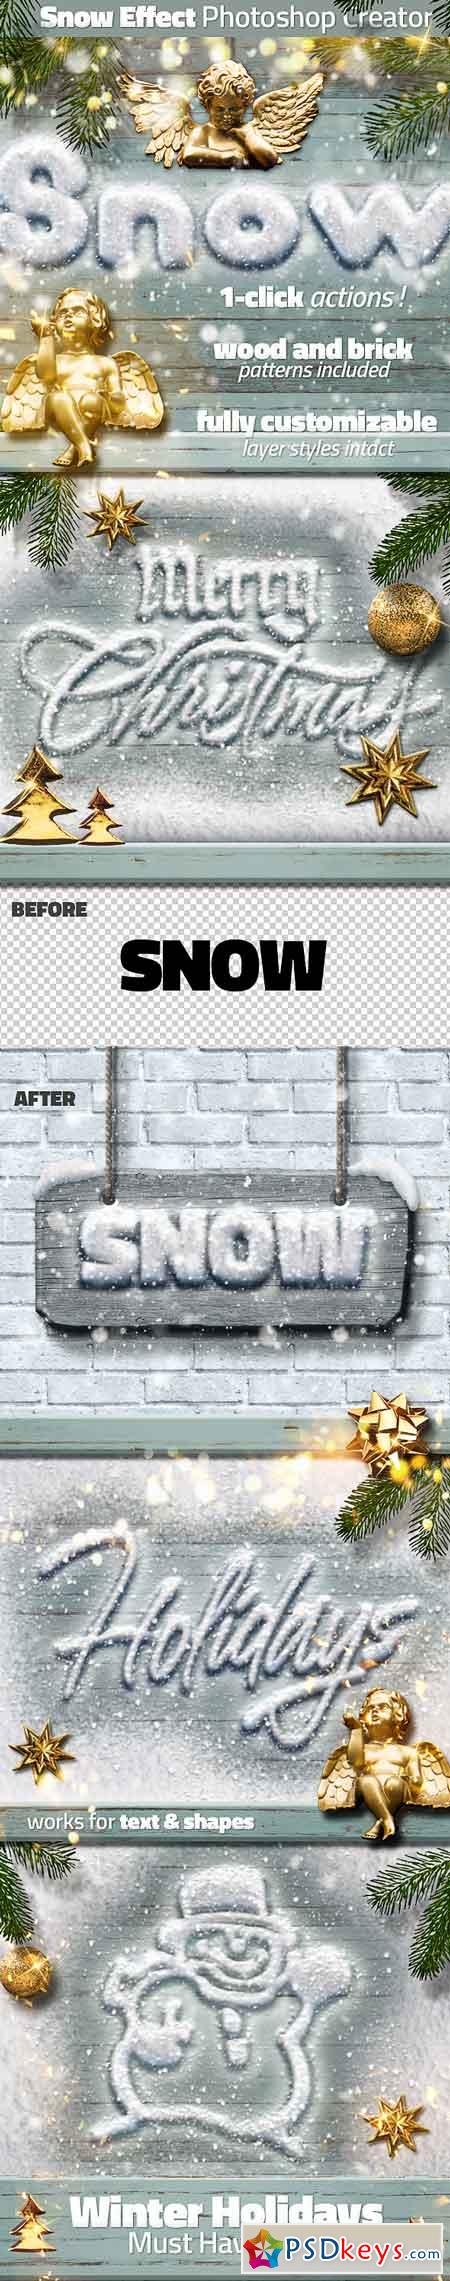 Snow and Wood Photoshop Winter Sign Creator 13933478